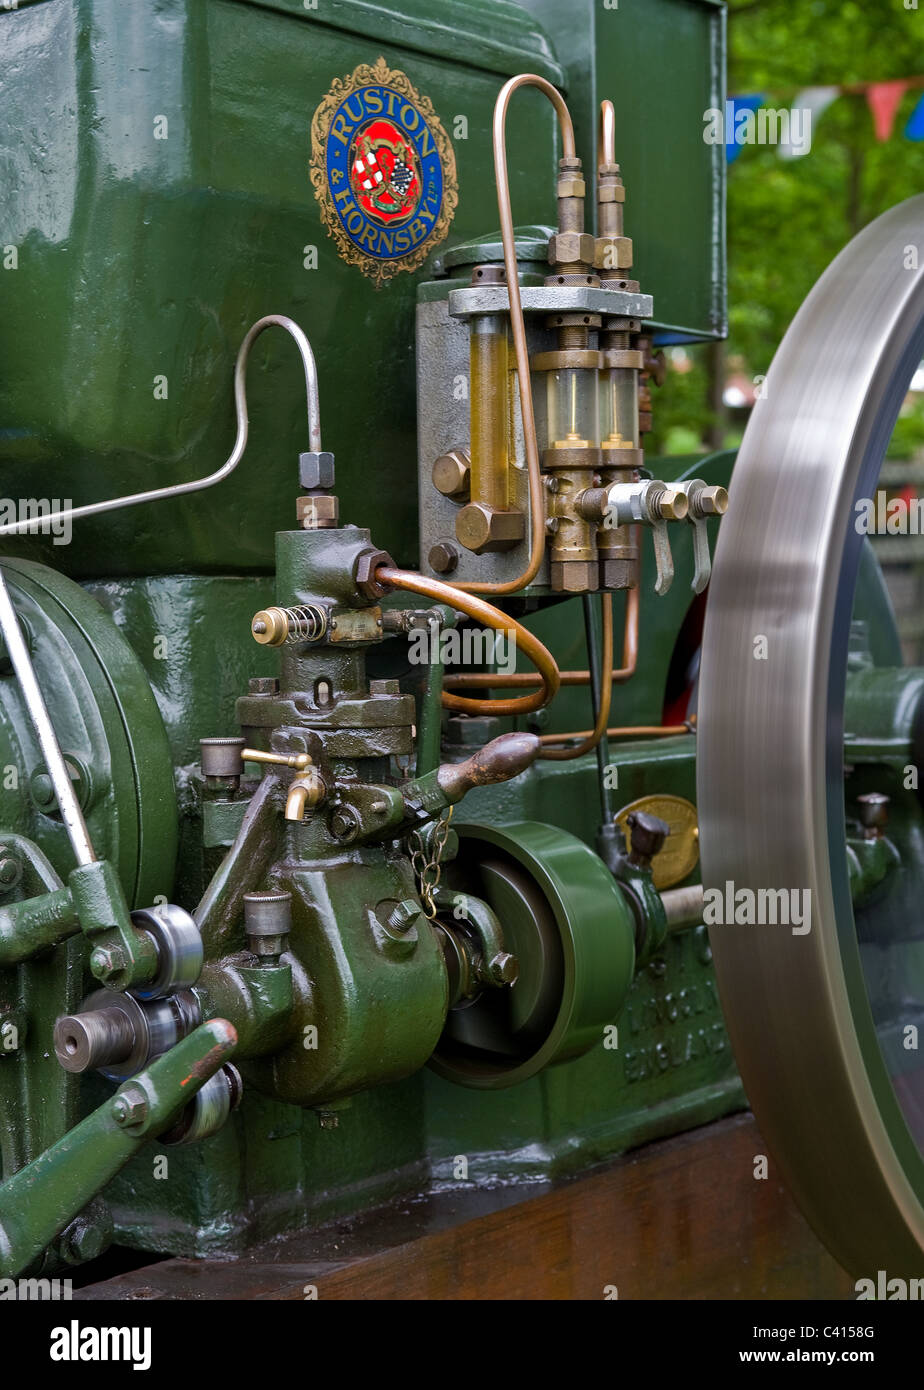 Closeup view of part of a static steam driven engine on display at a steam fair. Stock Photo